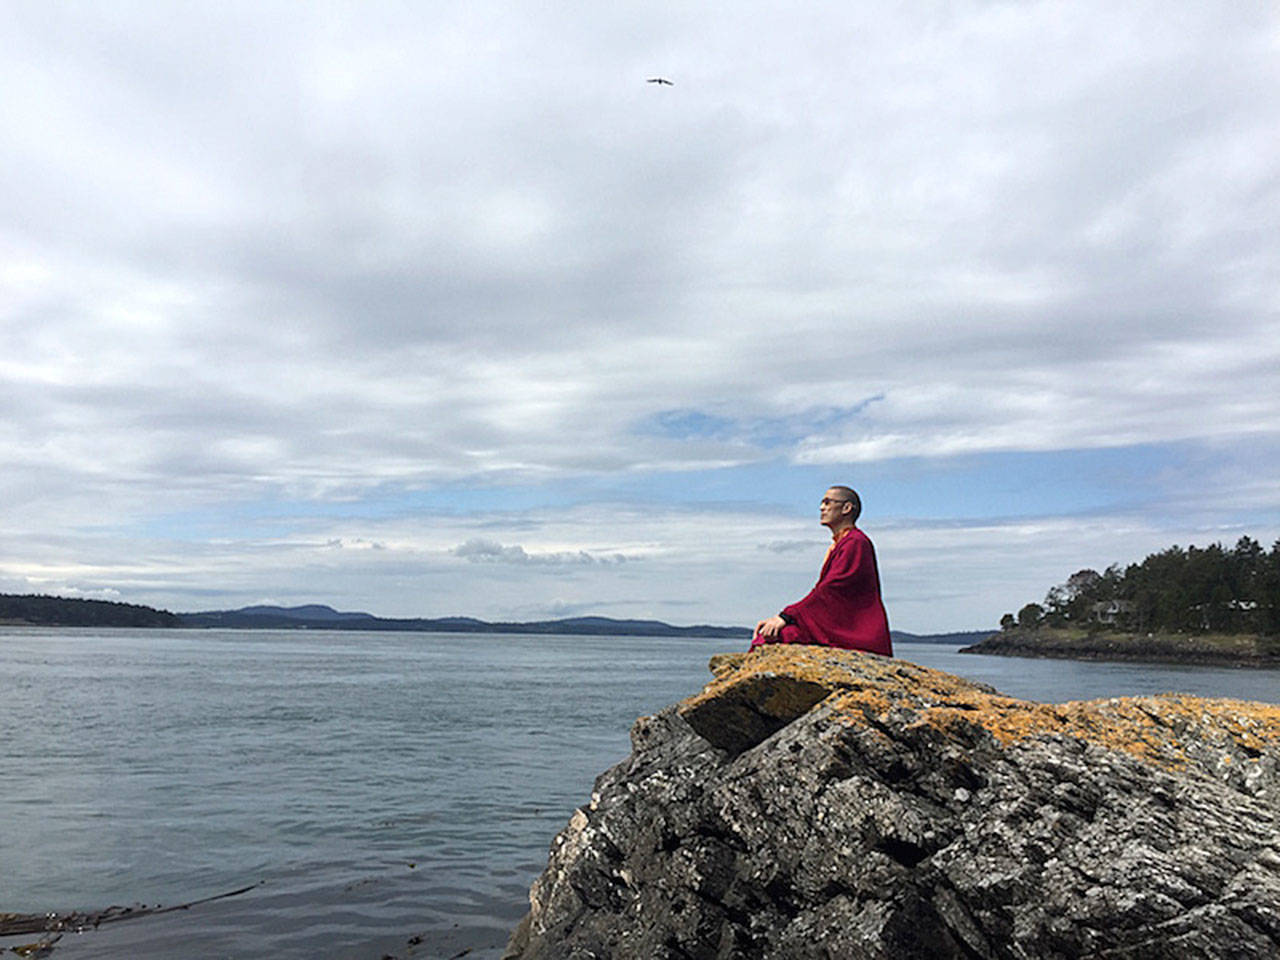 Kilung Foundation photo — Kilung Rinpoche, who lives and teaches on South Whidbey, meditates while overlooking Puget Sound. Rinpoche is a significant Tibetan Buddhist teacher and lineage holder.